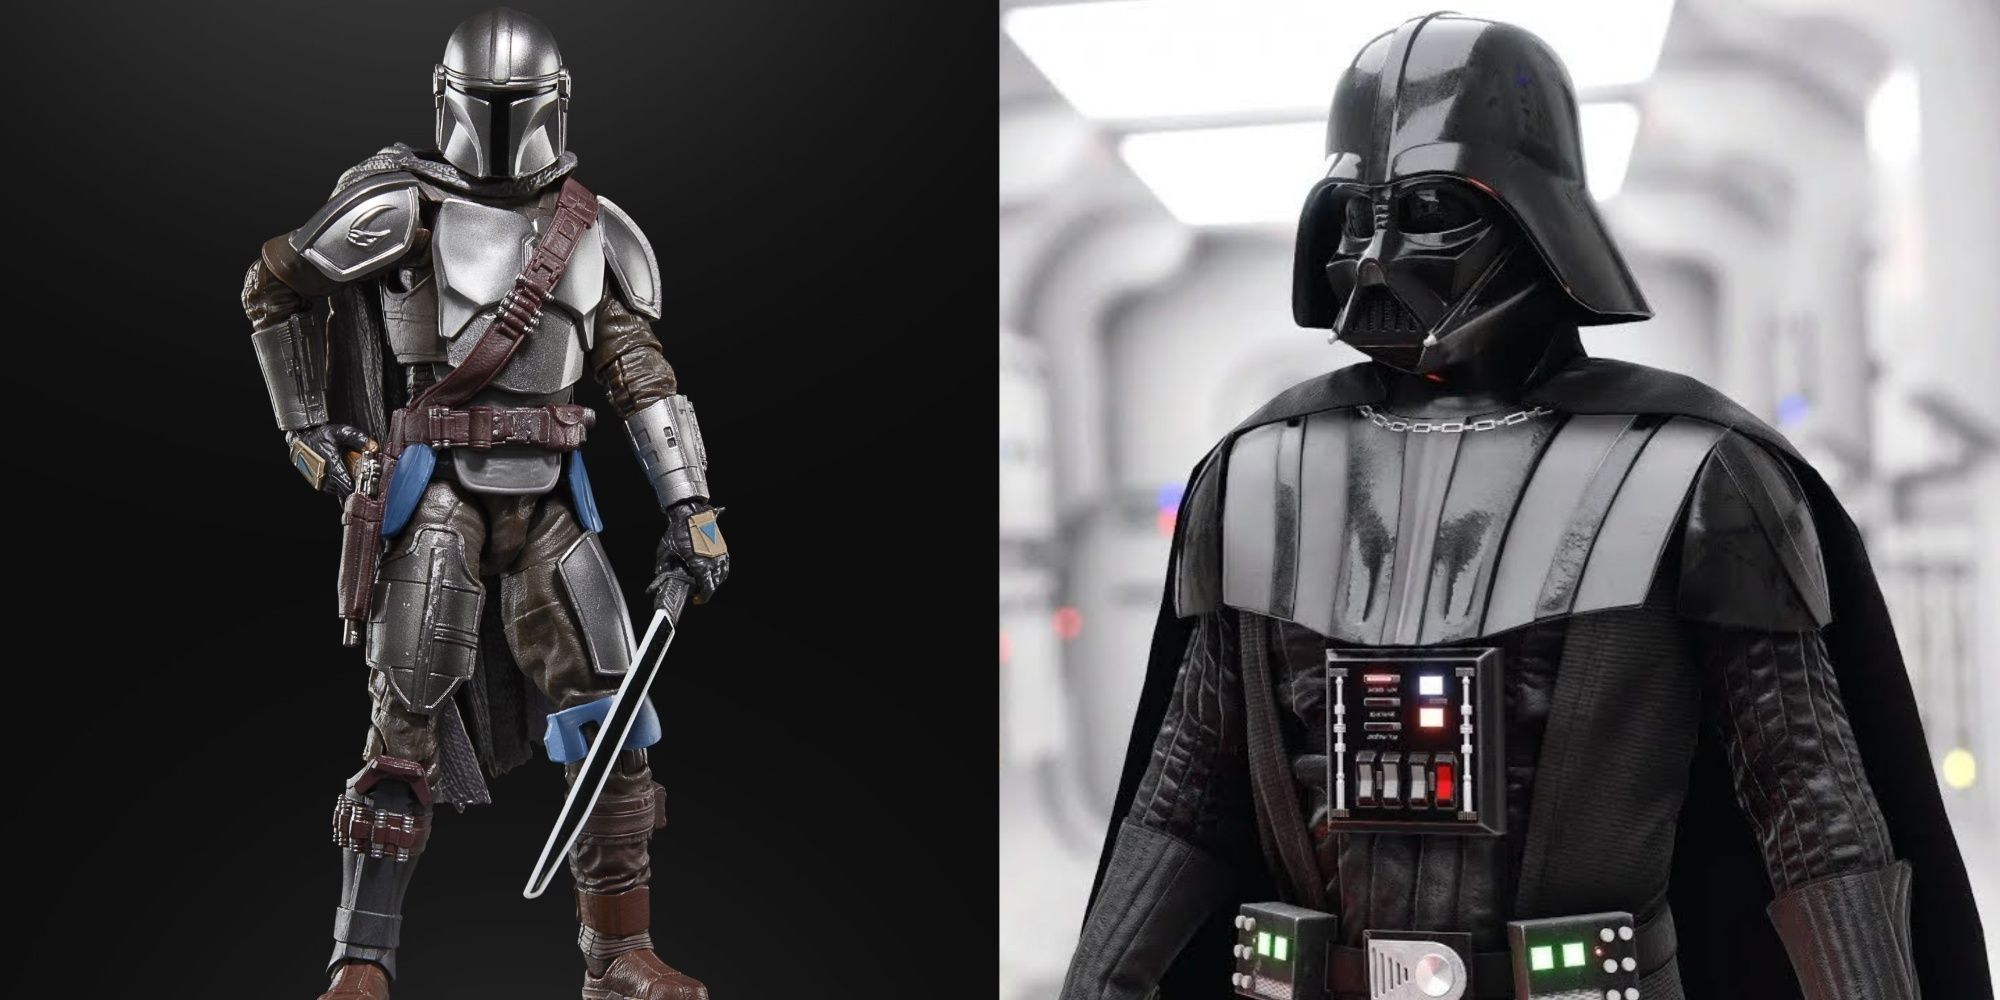 the mandalorian black series action figure olding the darksaber, and darth vader in a new hope